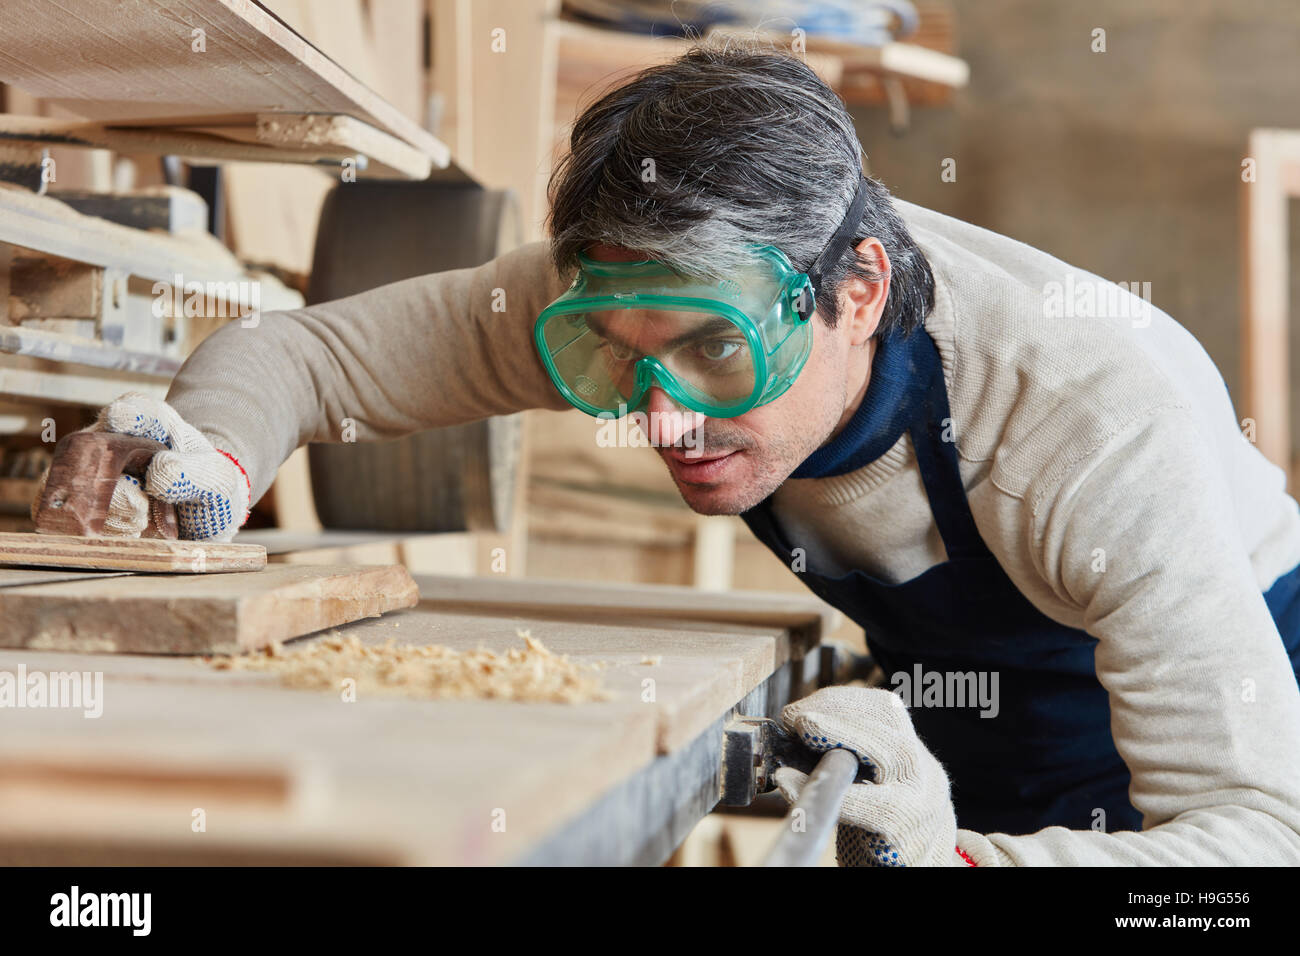 Joiner grinding wood with concentration Stock Photo